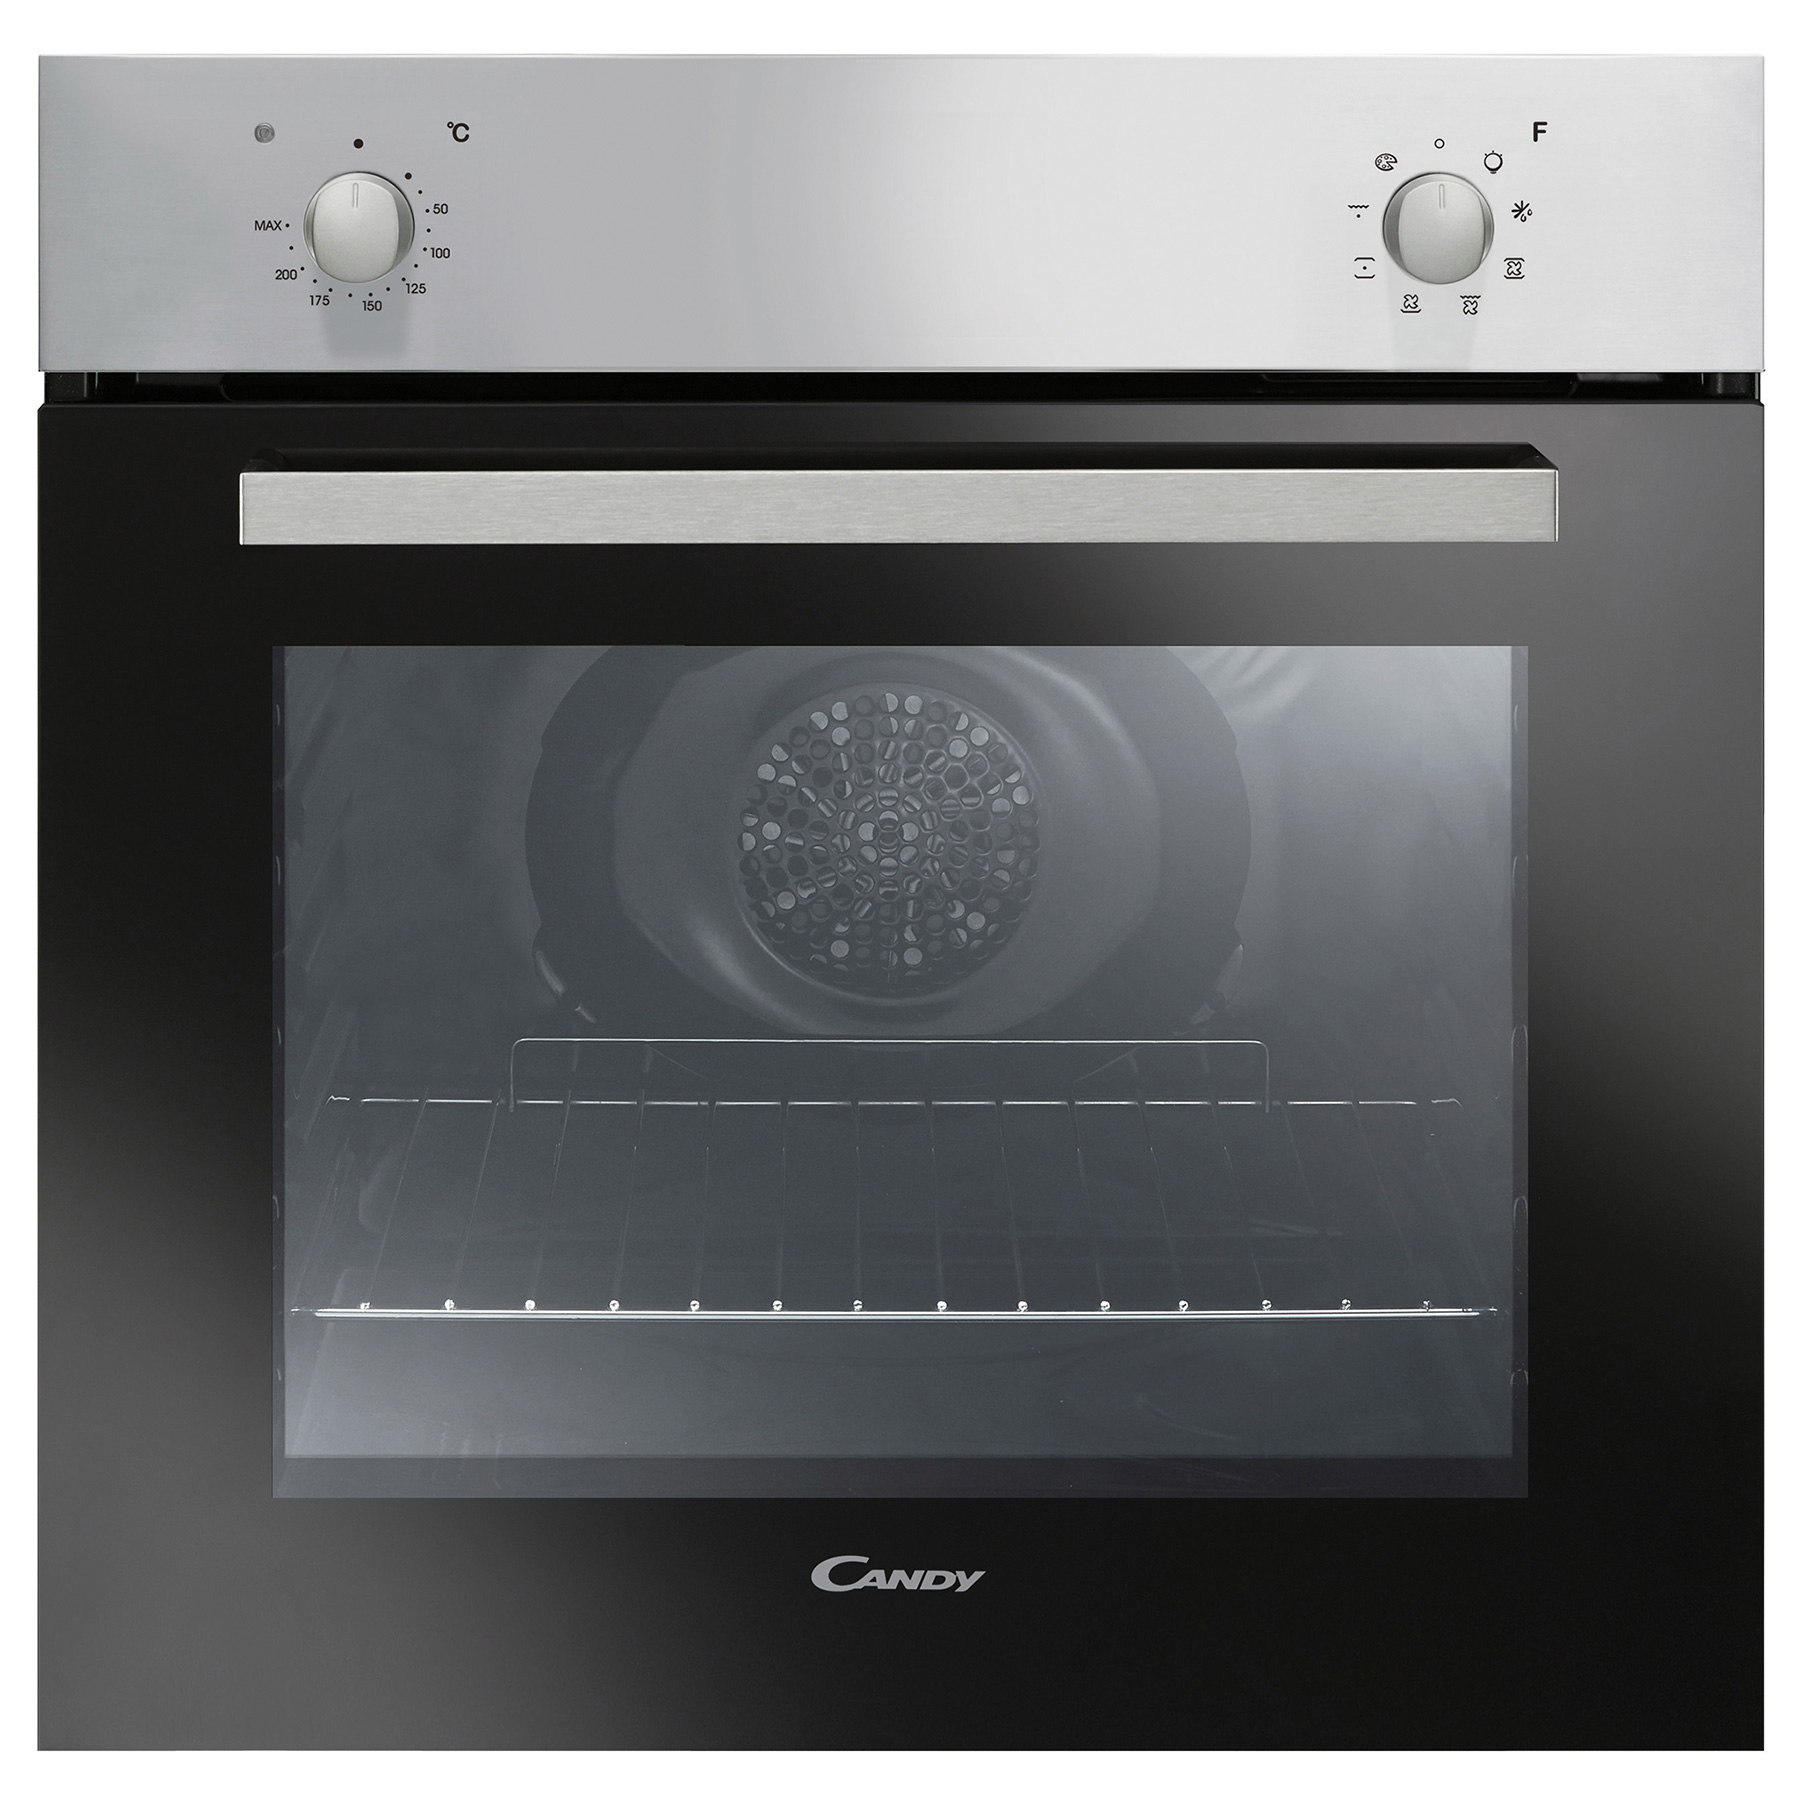 Candy FCP600XE Built In Electric Single Oven in St Steel 65L A Rated